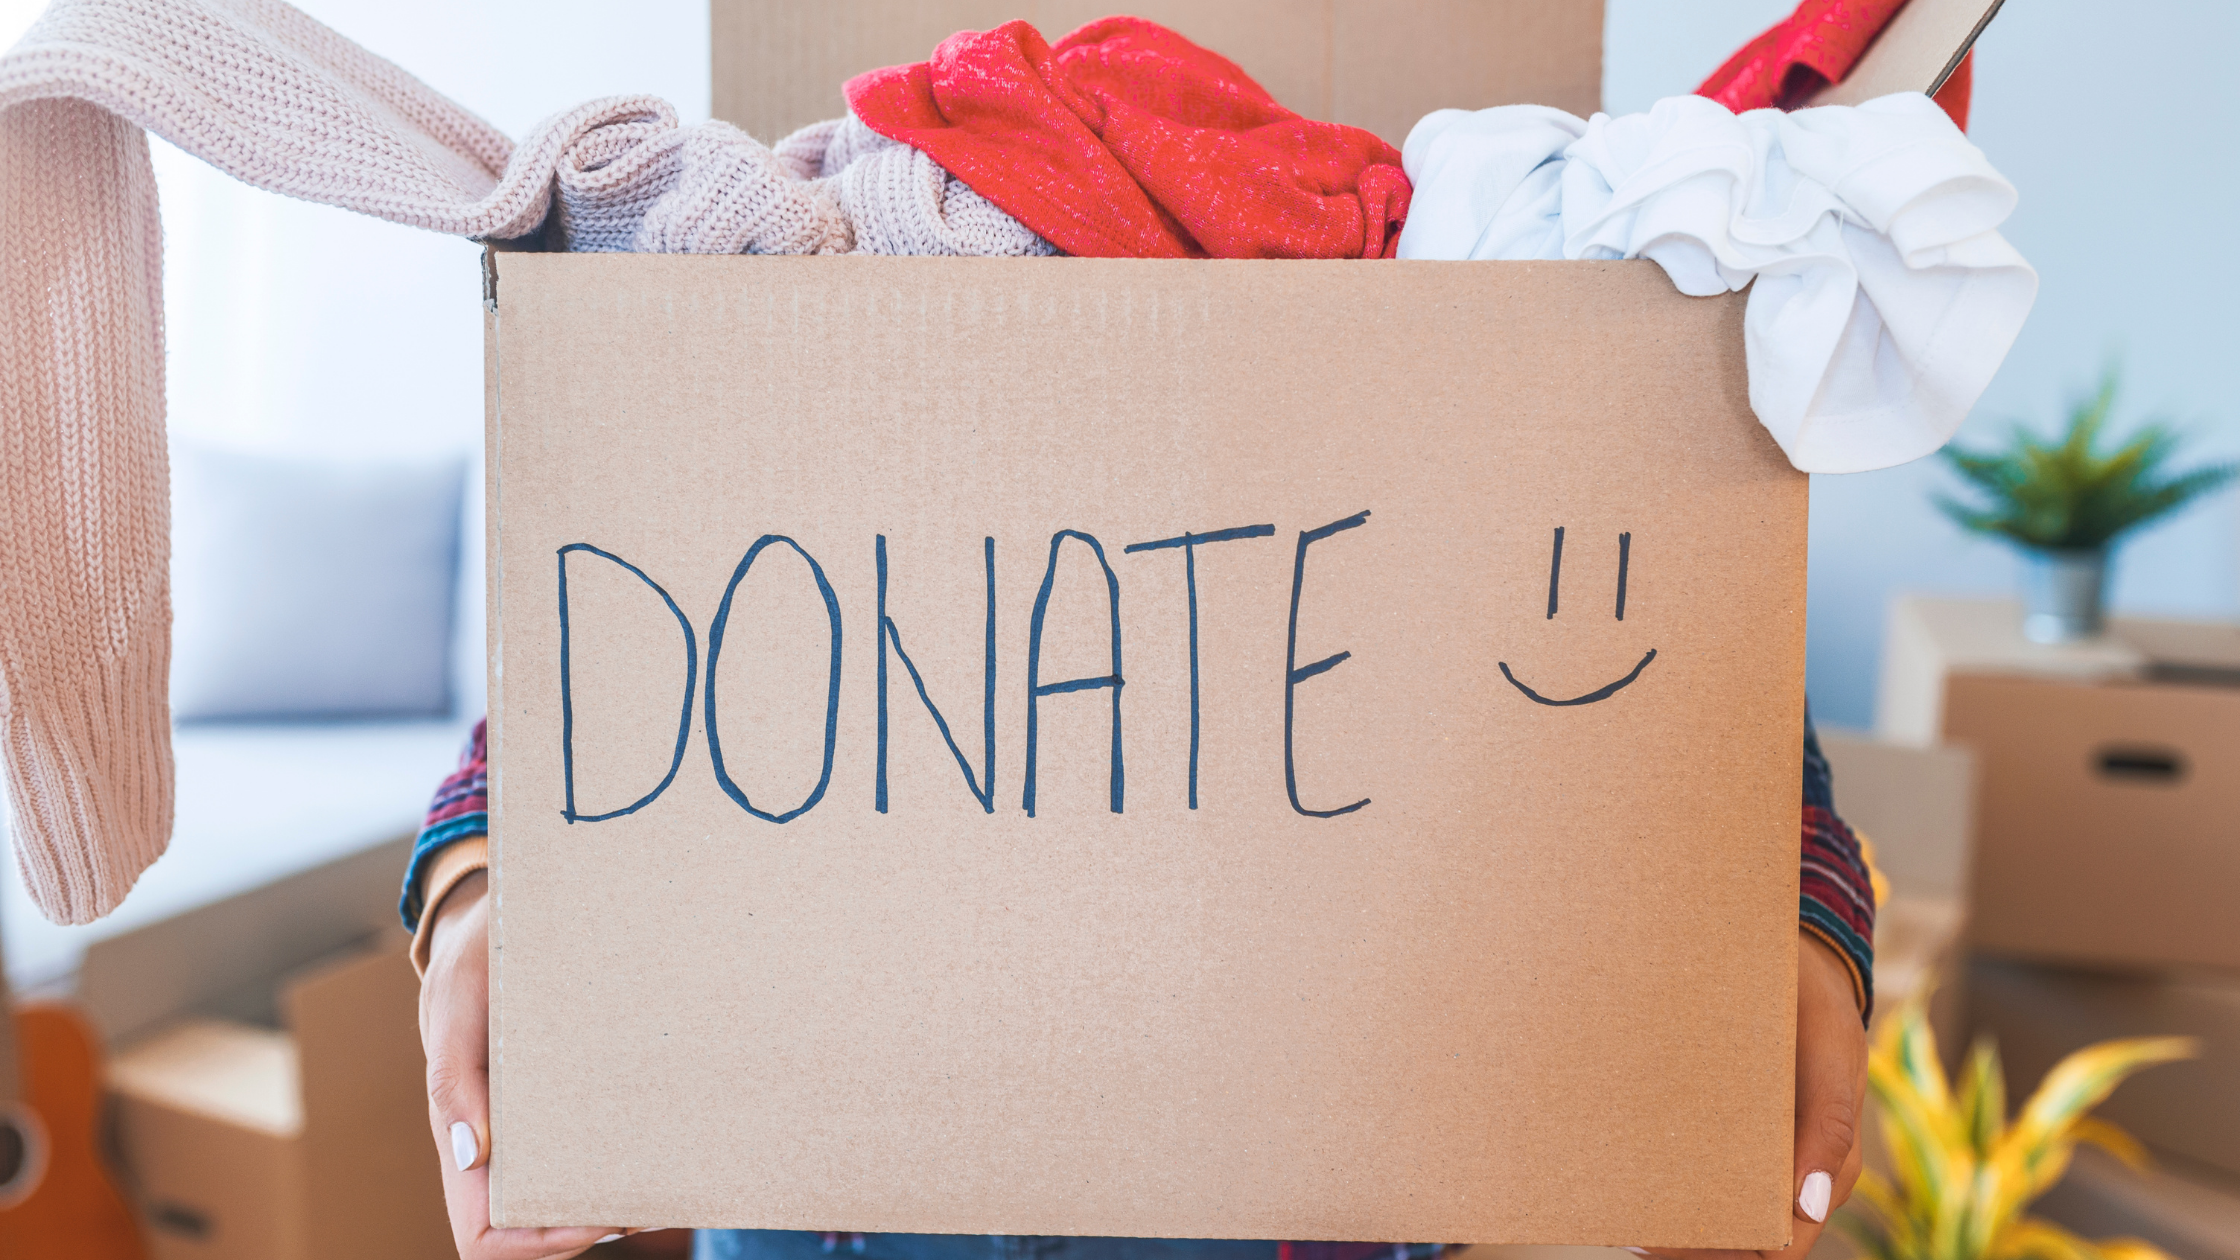 Donate Items On Our Needs List